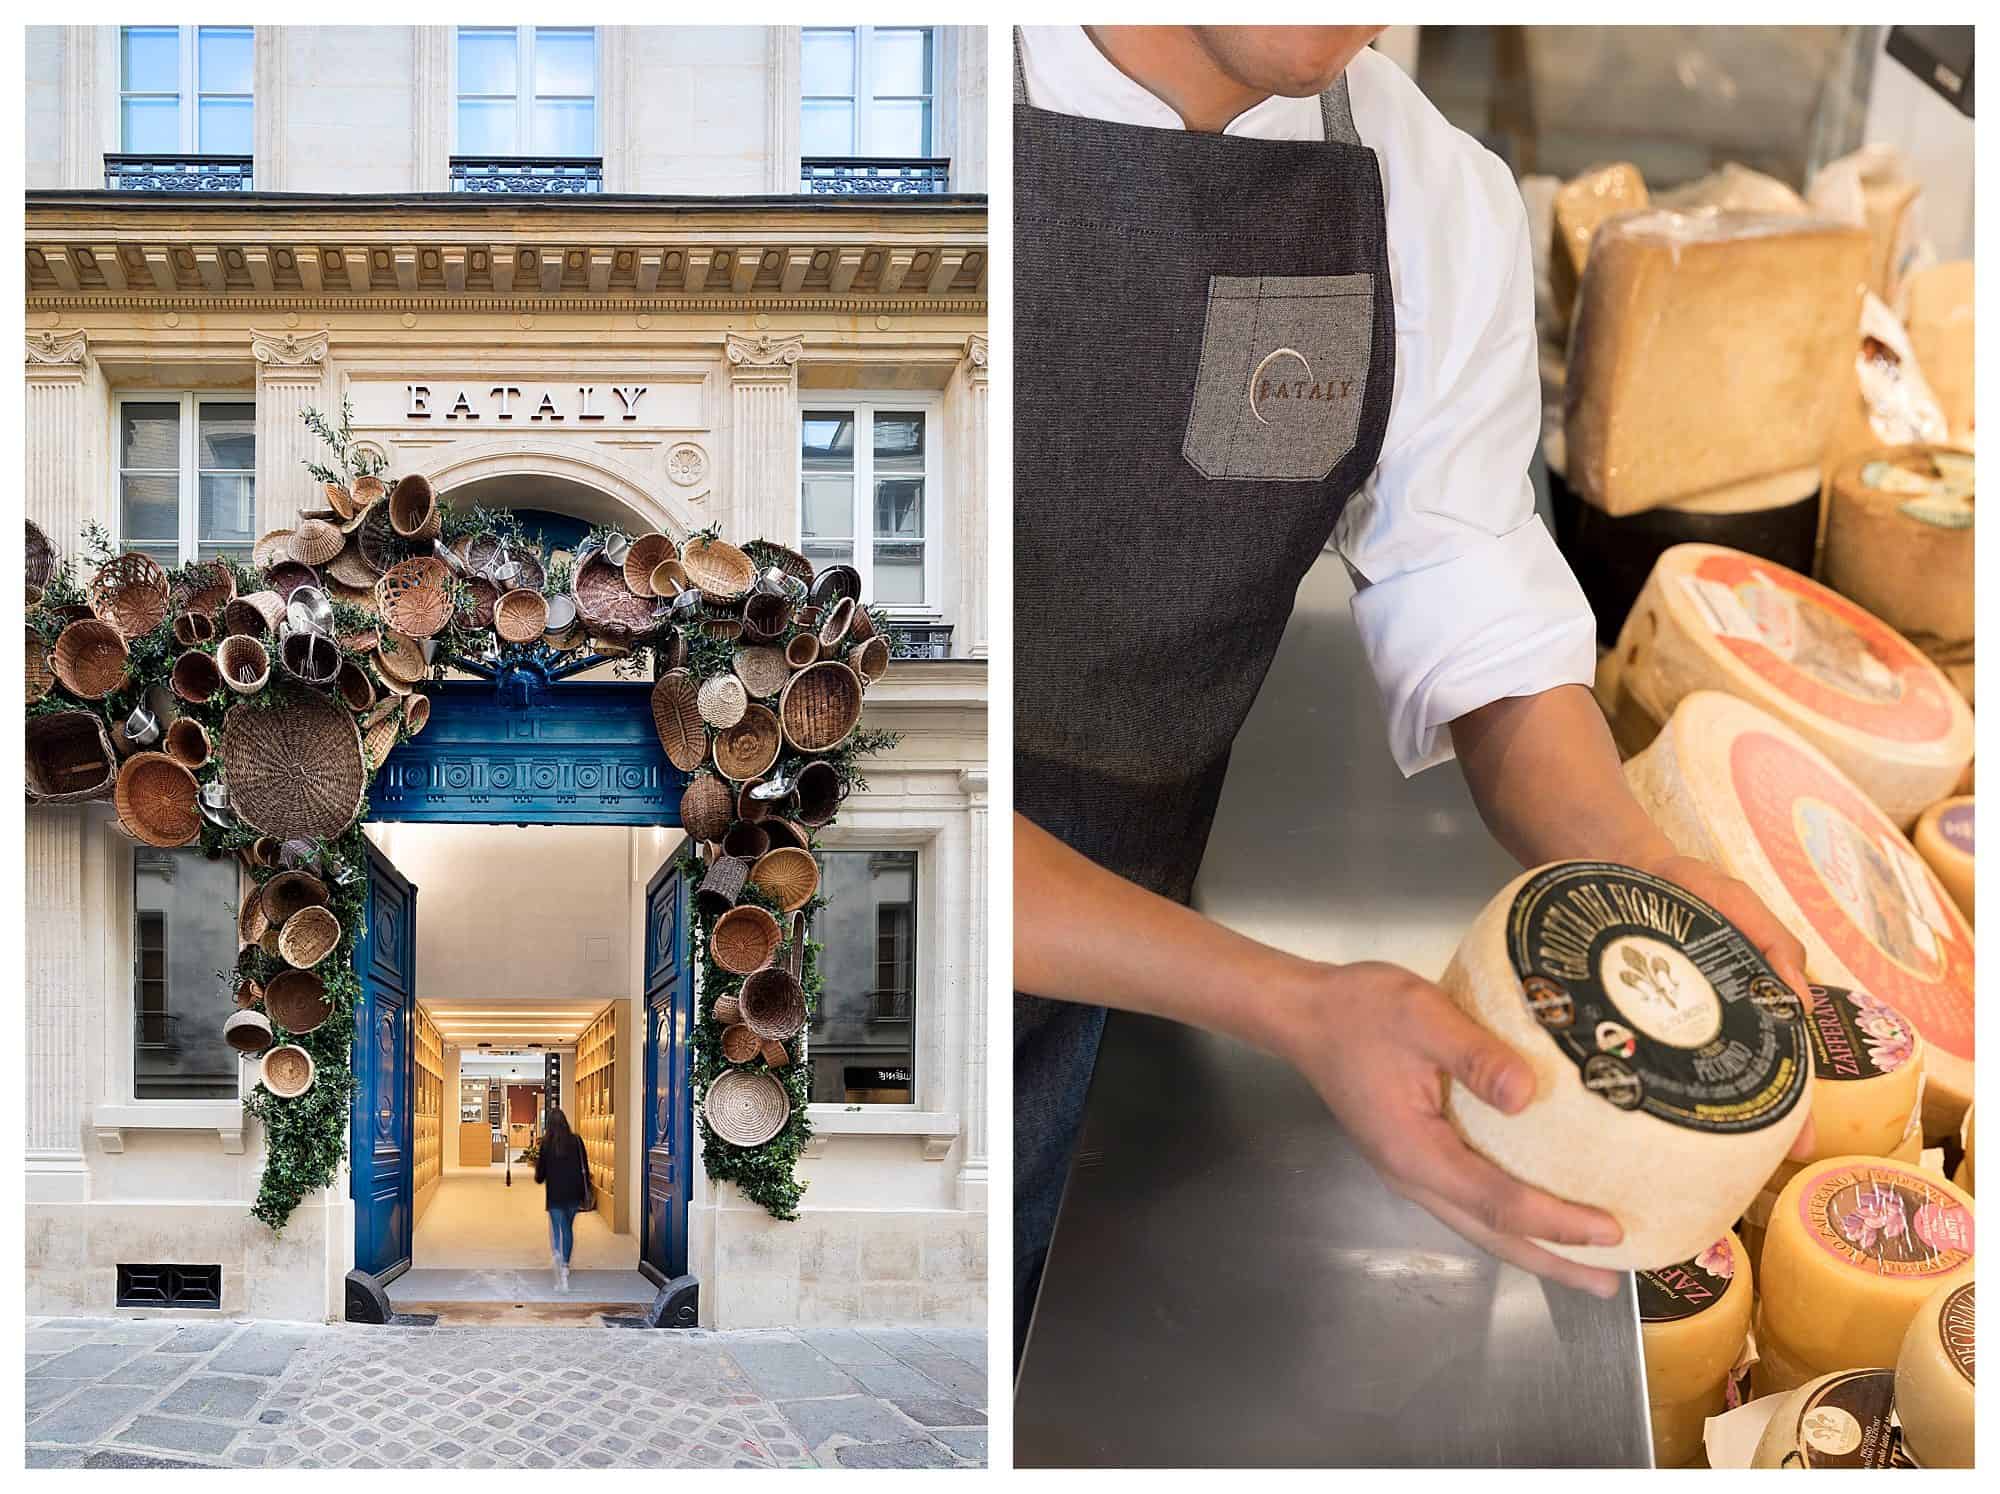 The iconic entrance with huge blue door adorned with seasonal decorations (left) and the cheese stand (right) at Eataly in the Marais.